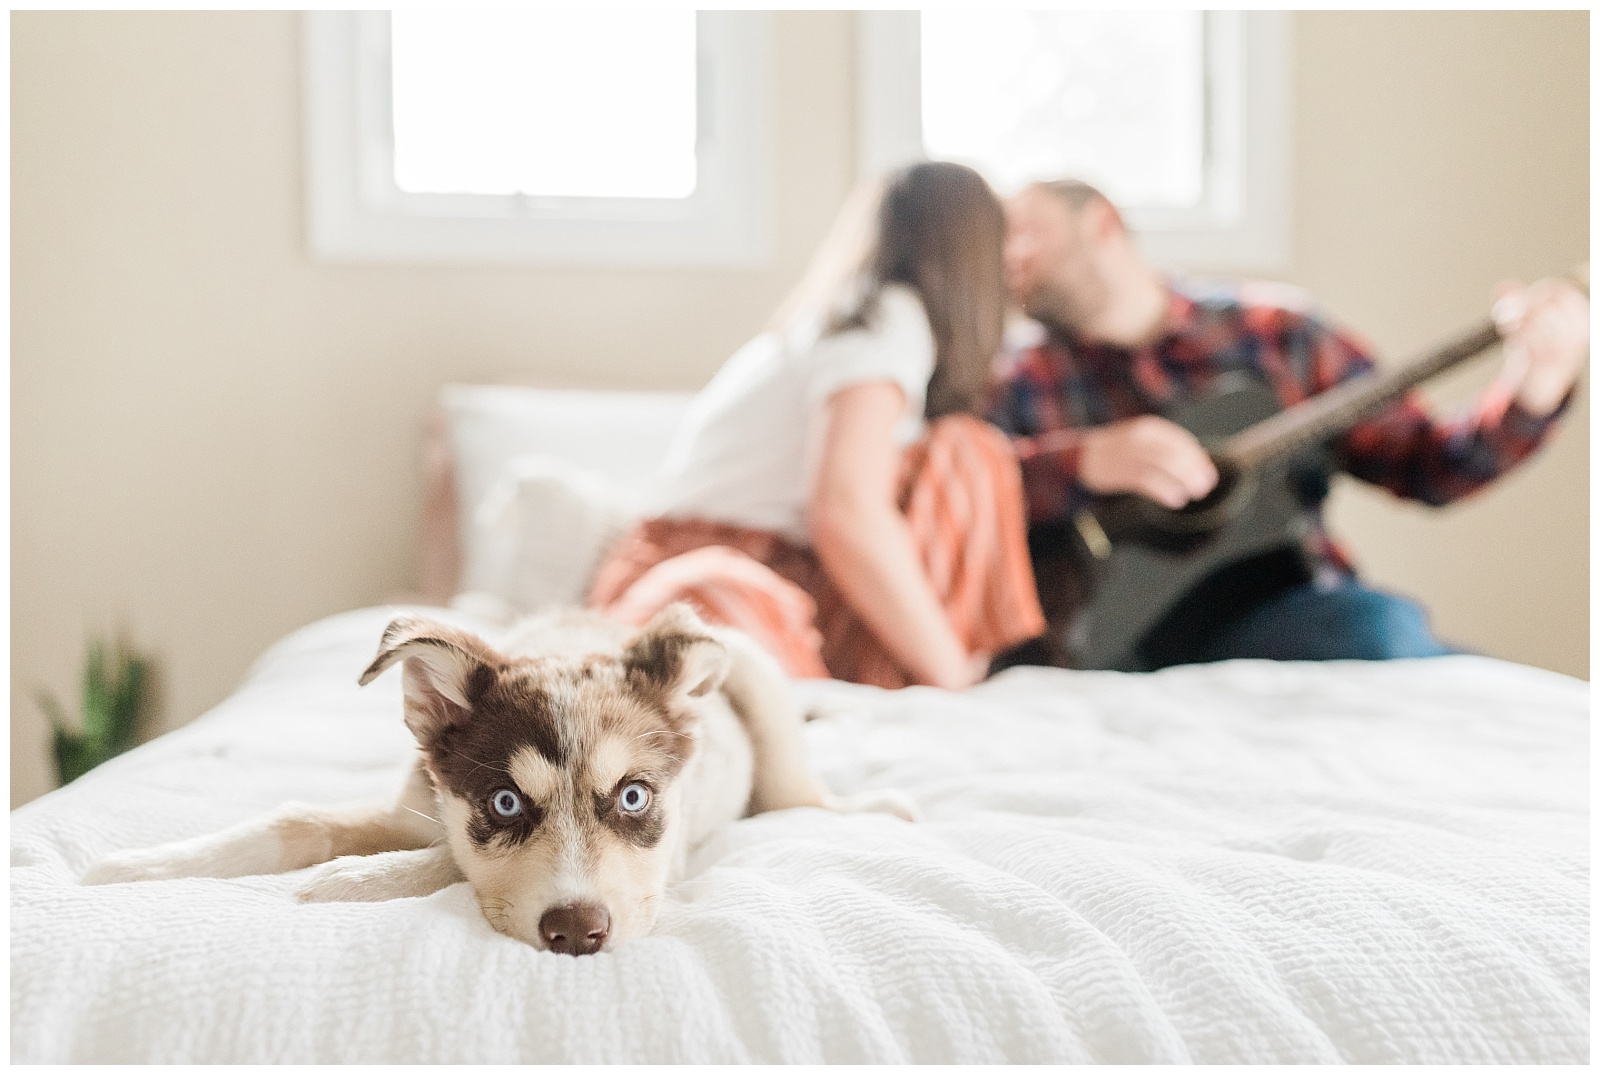 In home photo session, new puppy, casual, weekend, new jersey lifestyle, natural light photographer, guitar, sunday, cozy